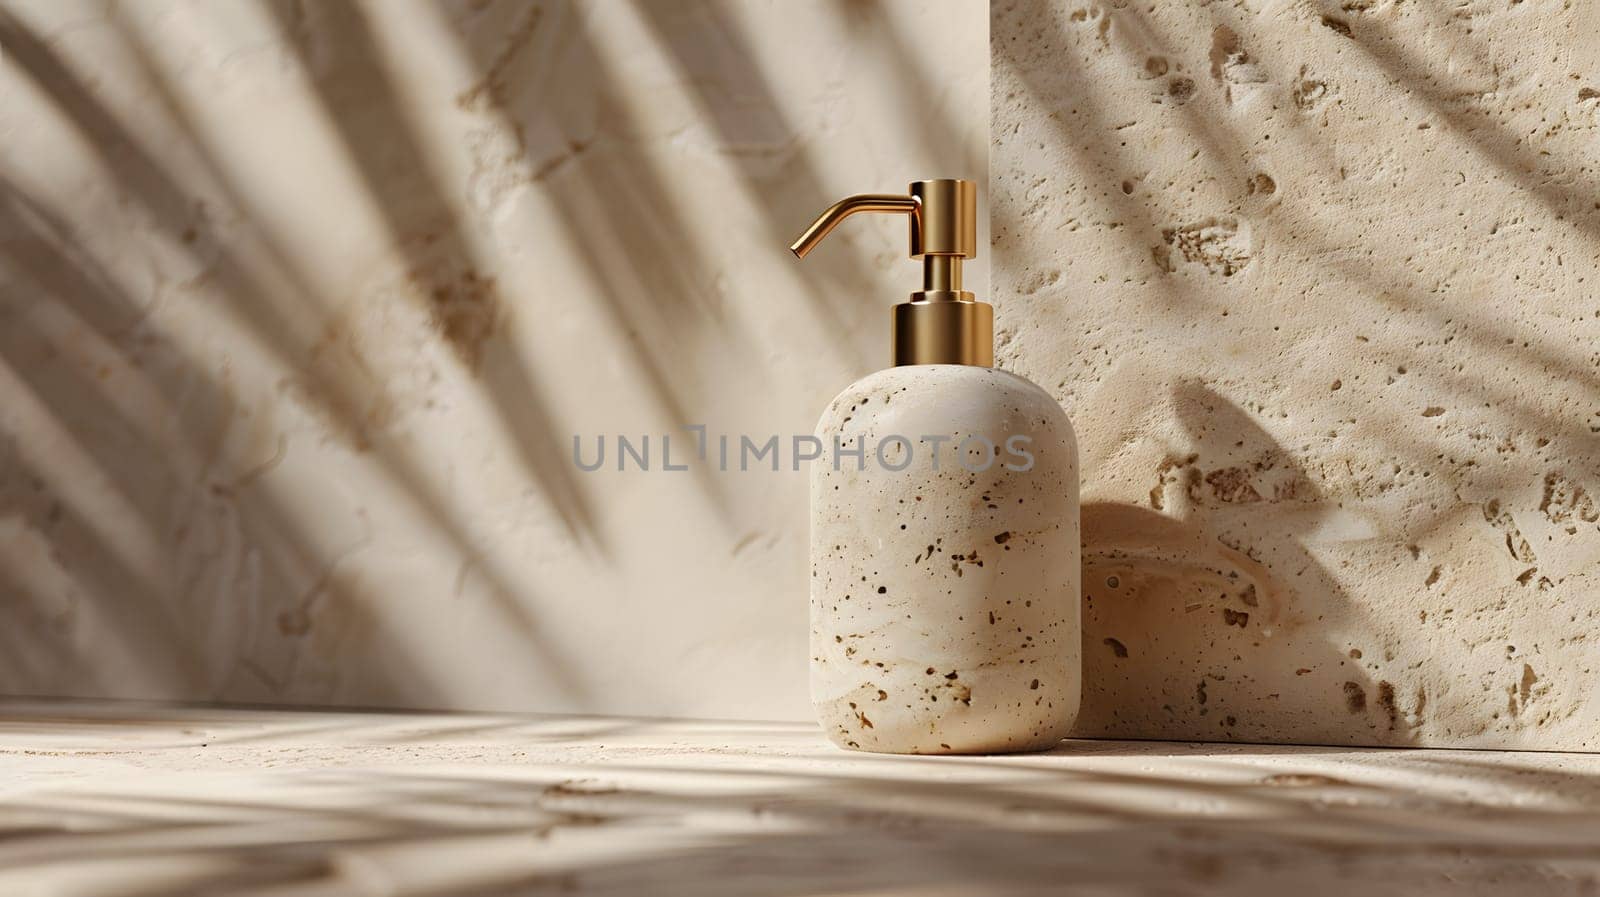 A glass bottle soap dispenser with metal pump sits on a wooden table against a stone wall, blending modern design with rustic elements